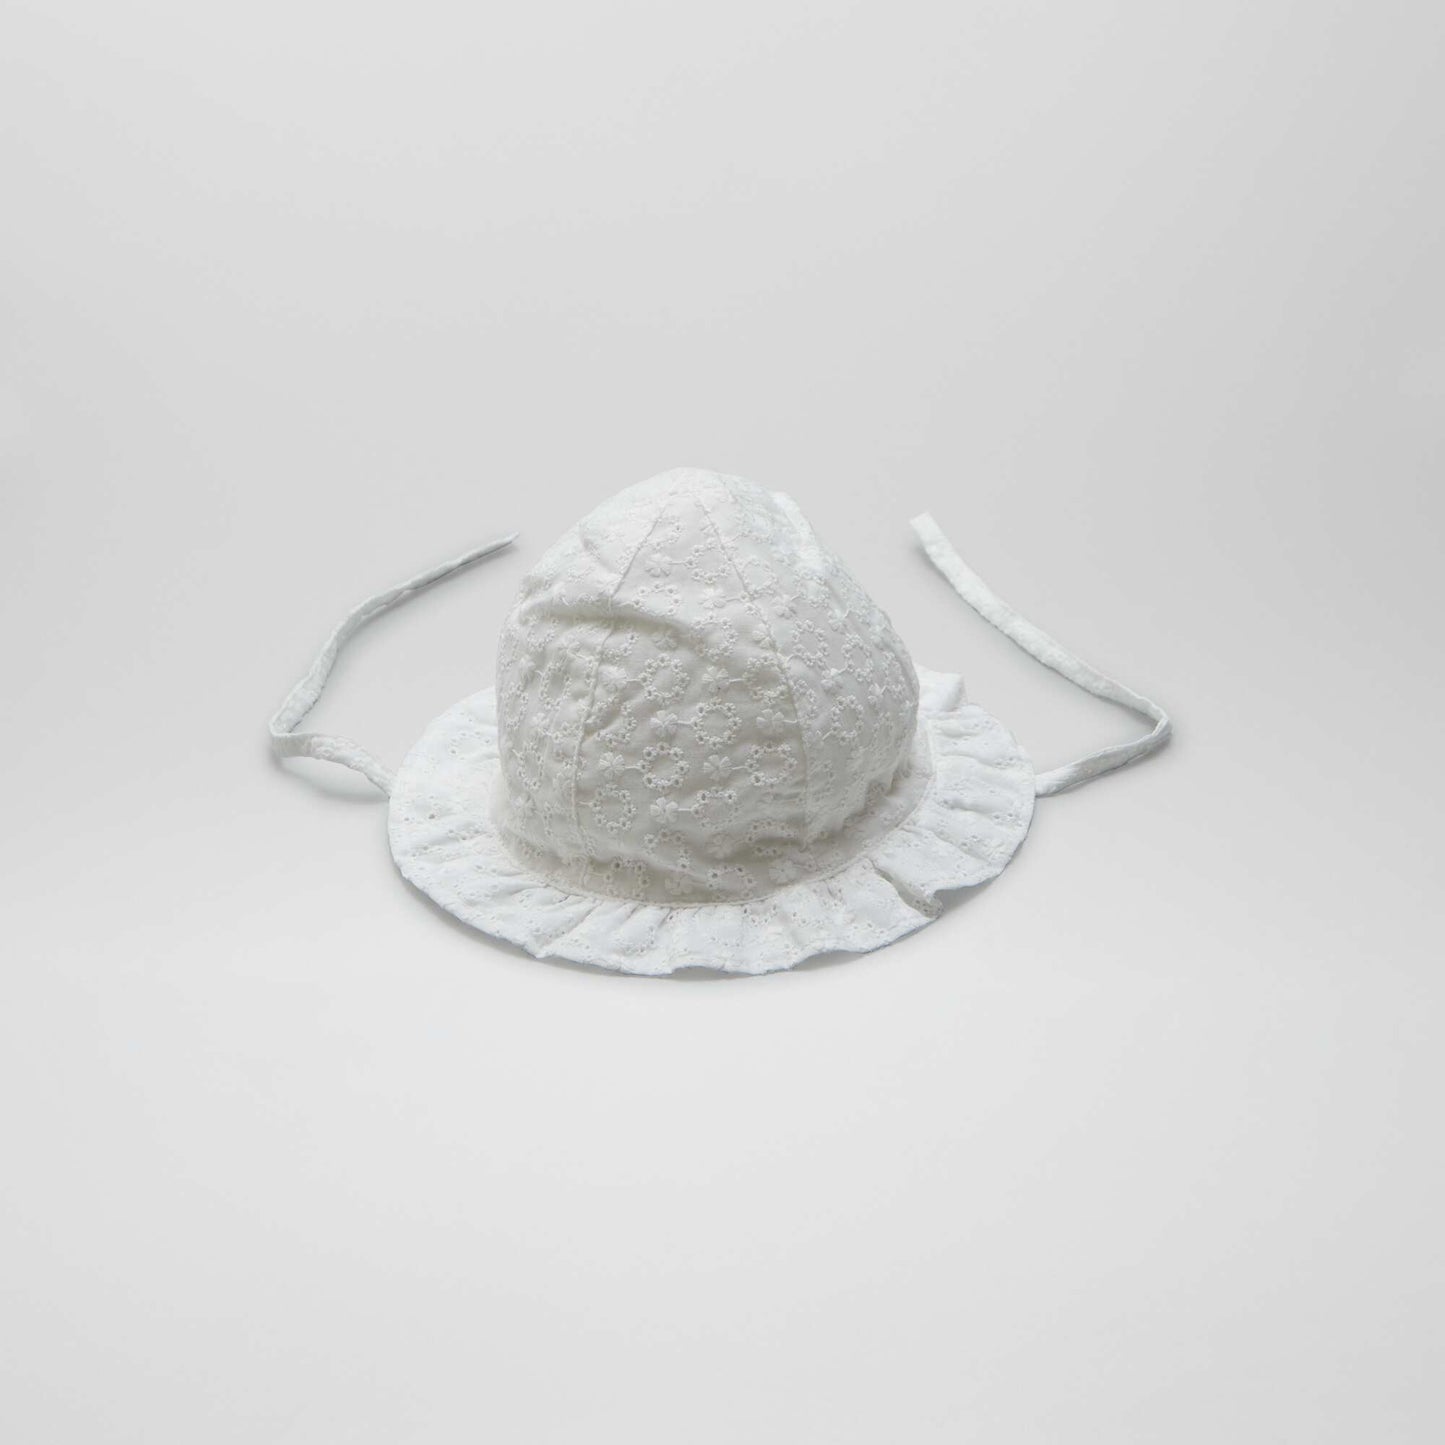 Broderie anglaise sun hat WHITE